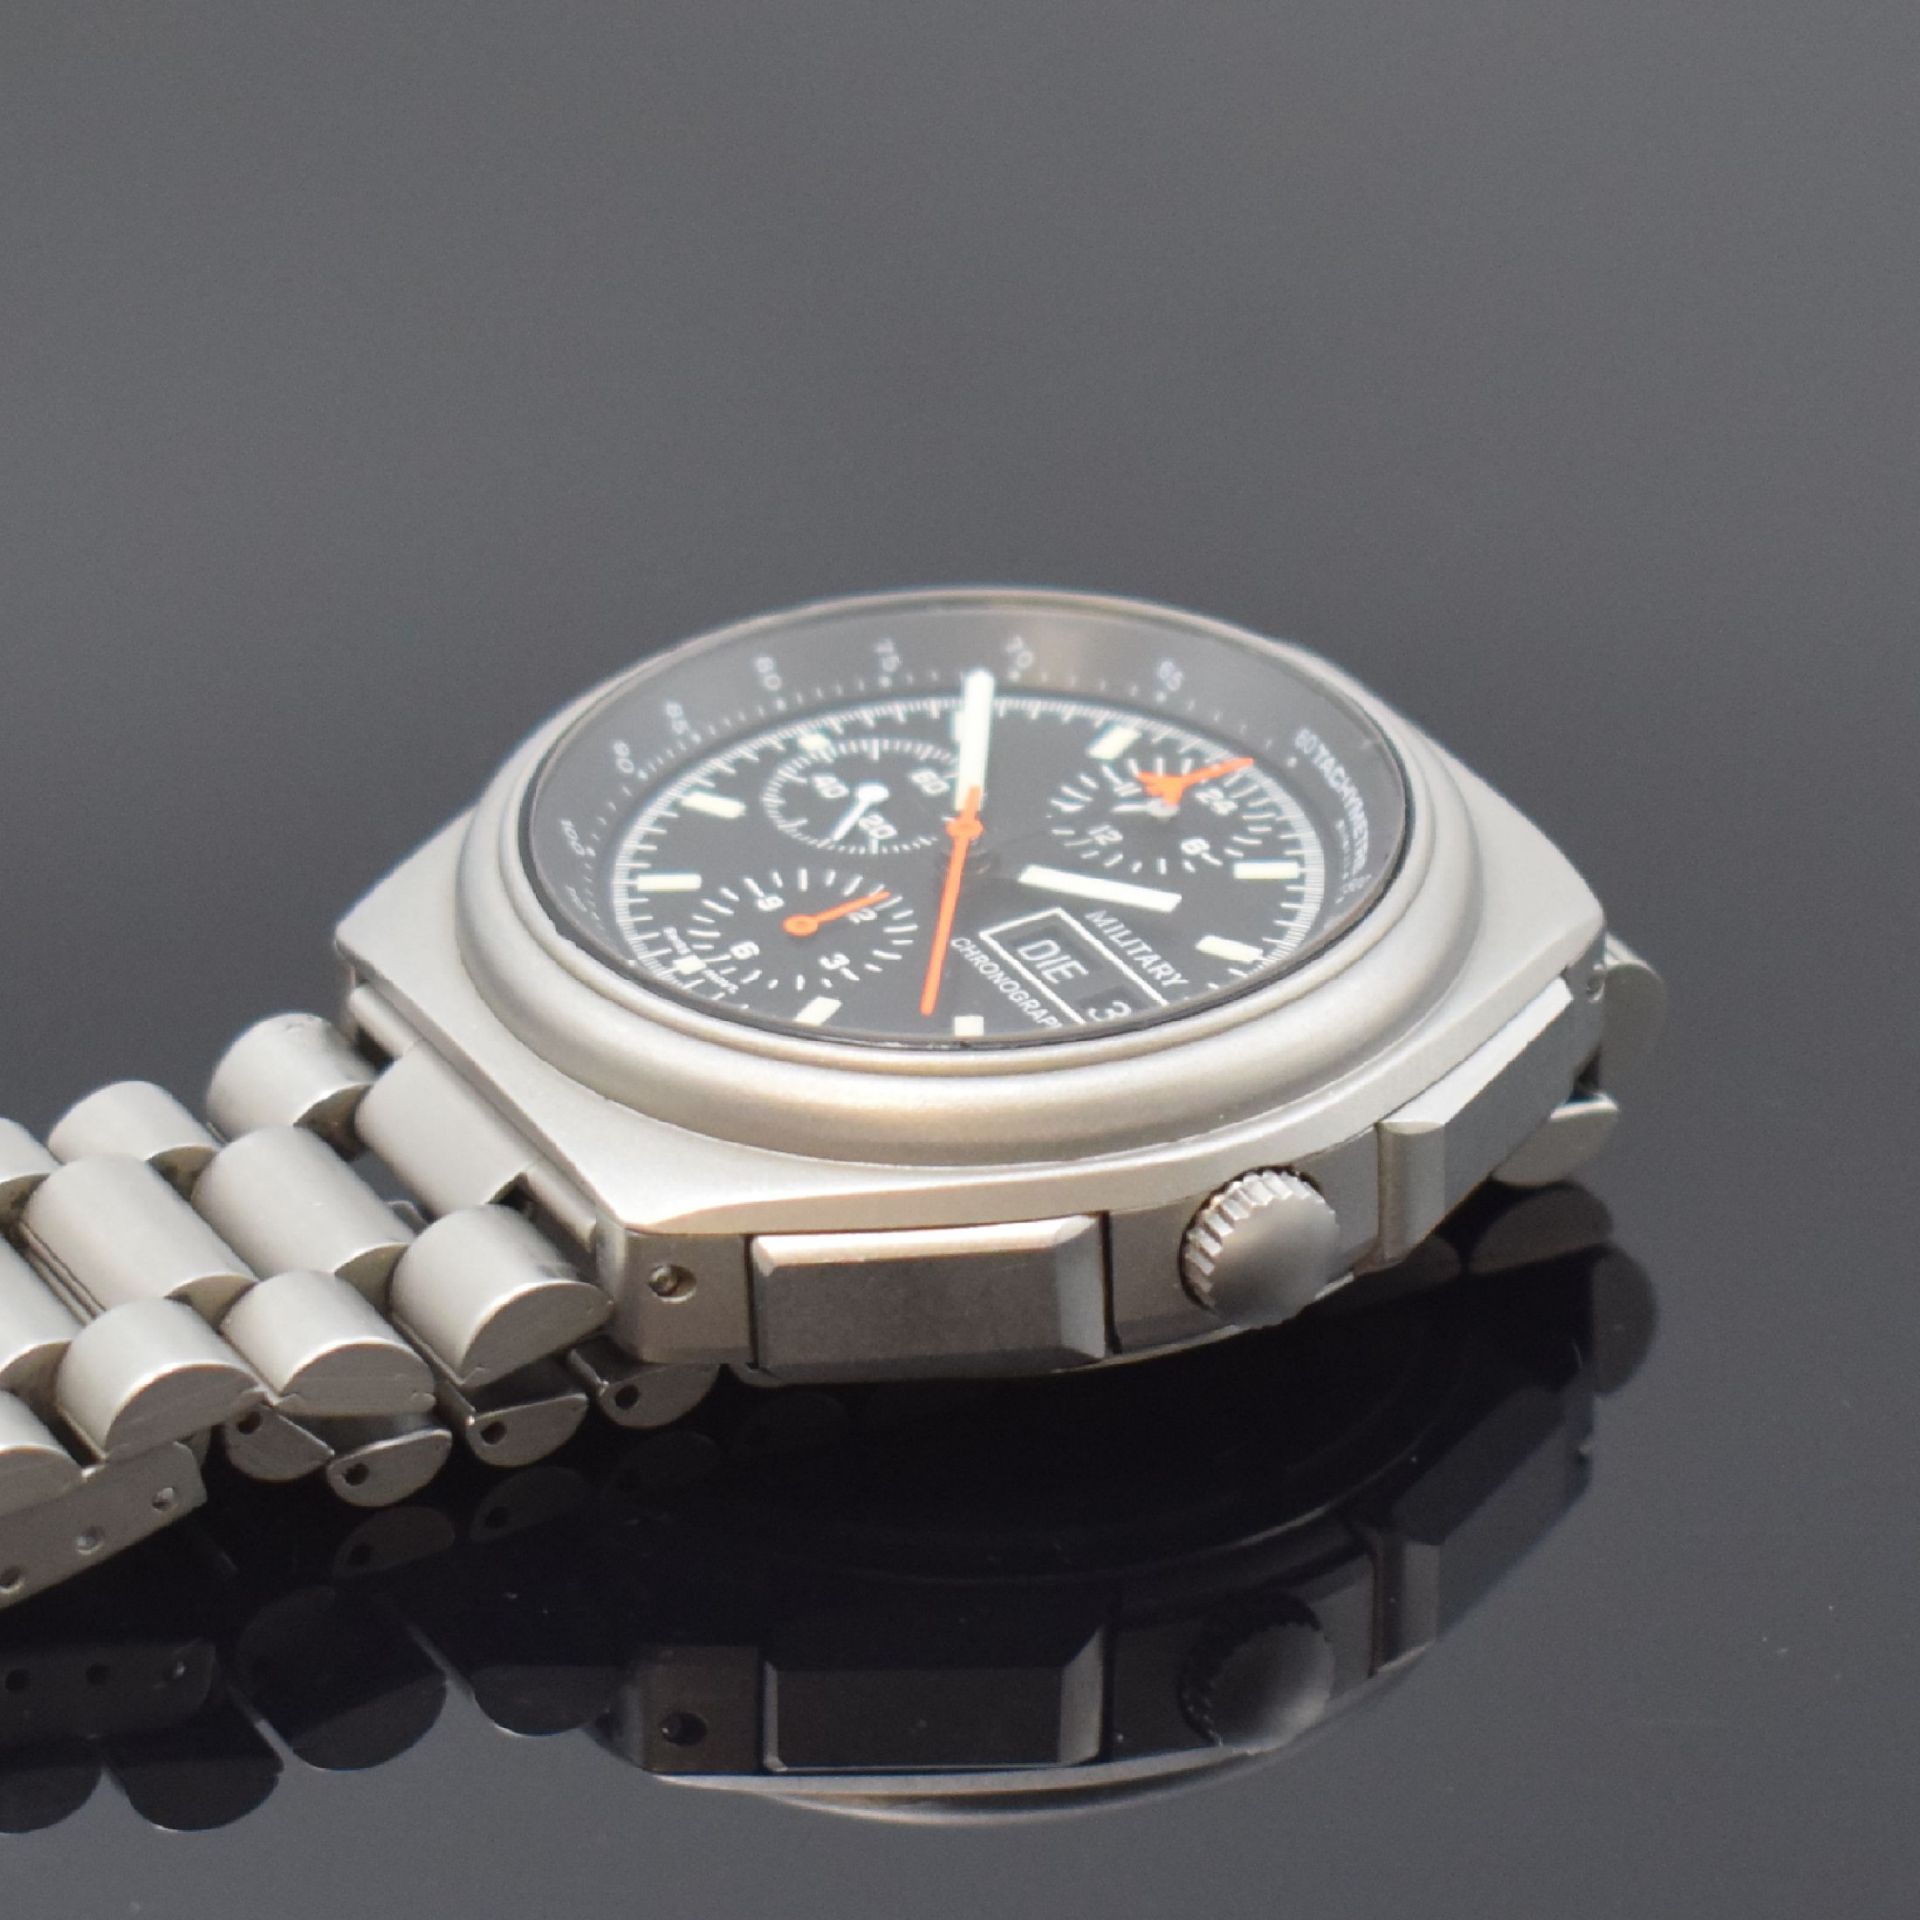 TUTIMA Military Armbandchronograph in Stahl/ Stahlband, - Image 4 of 5